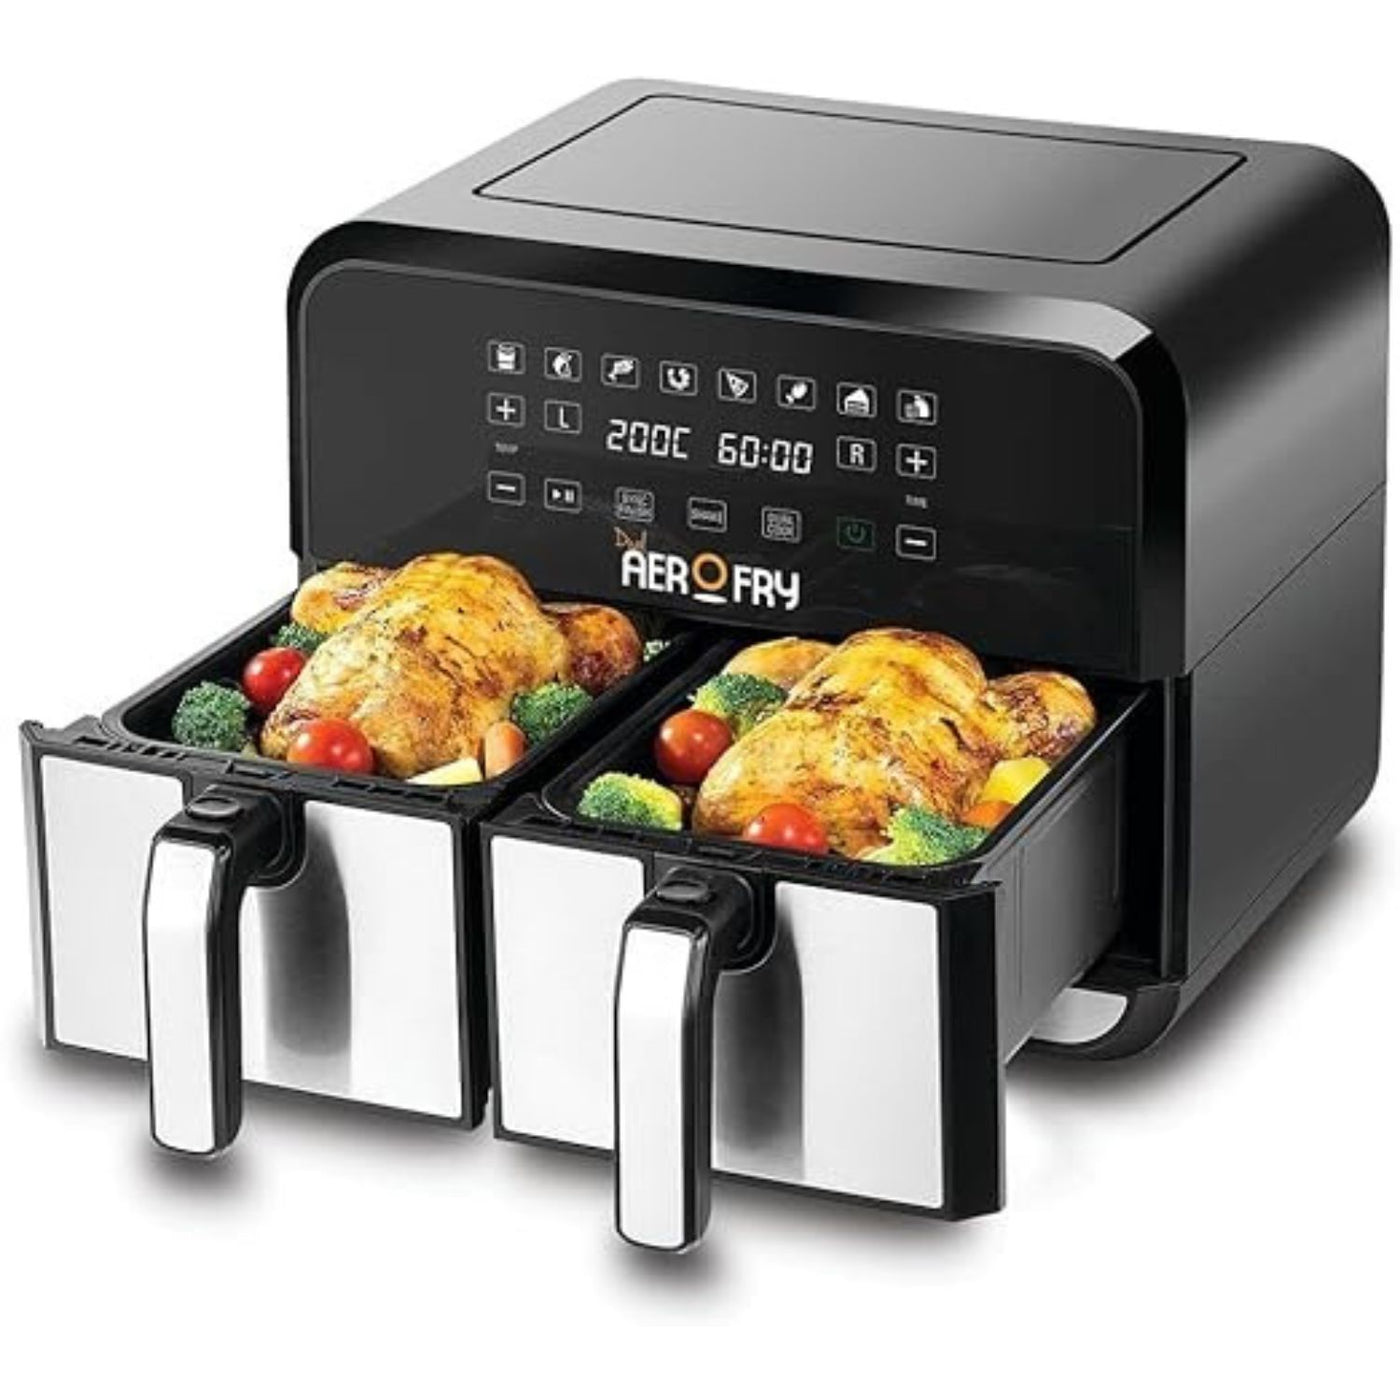 Digital Dual Zone Air Fryer 1700W 4L+4L Capacity With Rapid Hot Air Circulation For Frying, Grilling, Broiling, Roasting, and Baking